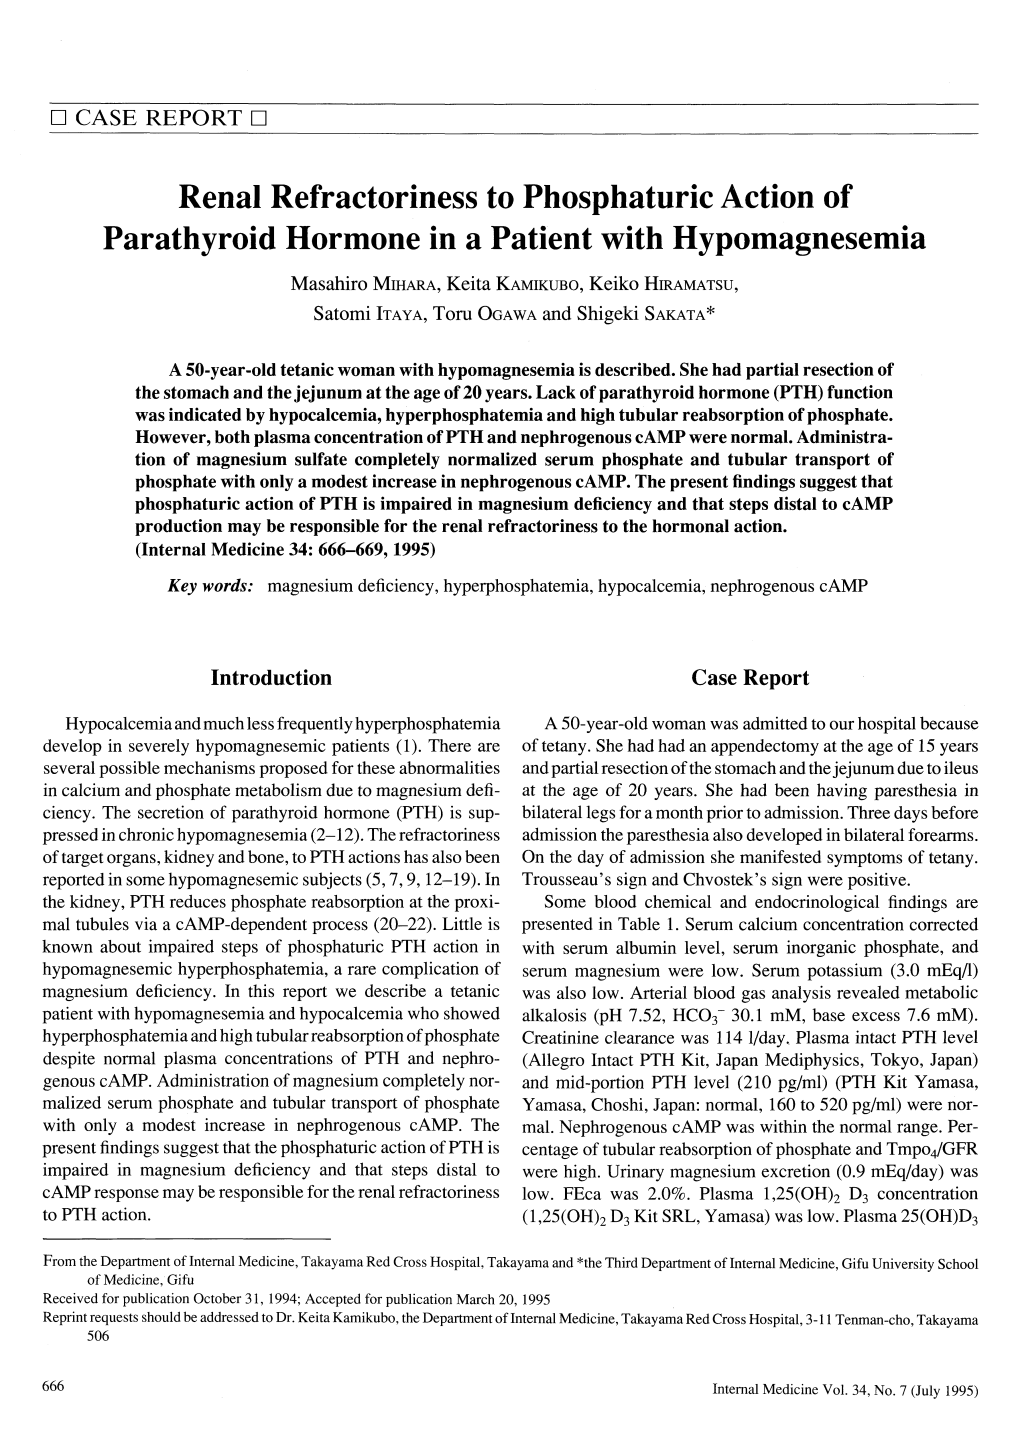 Renal Refractoriness to Phosphaturic Action of Parathyroid Hormonein A